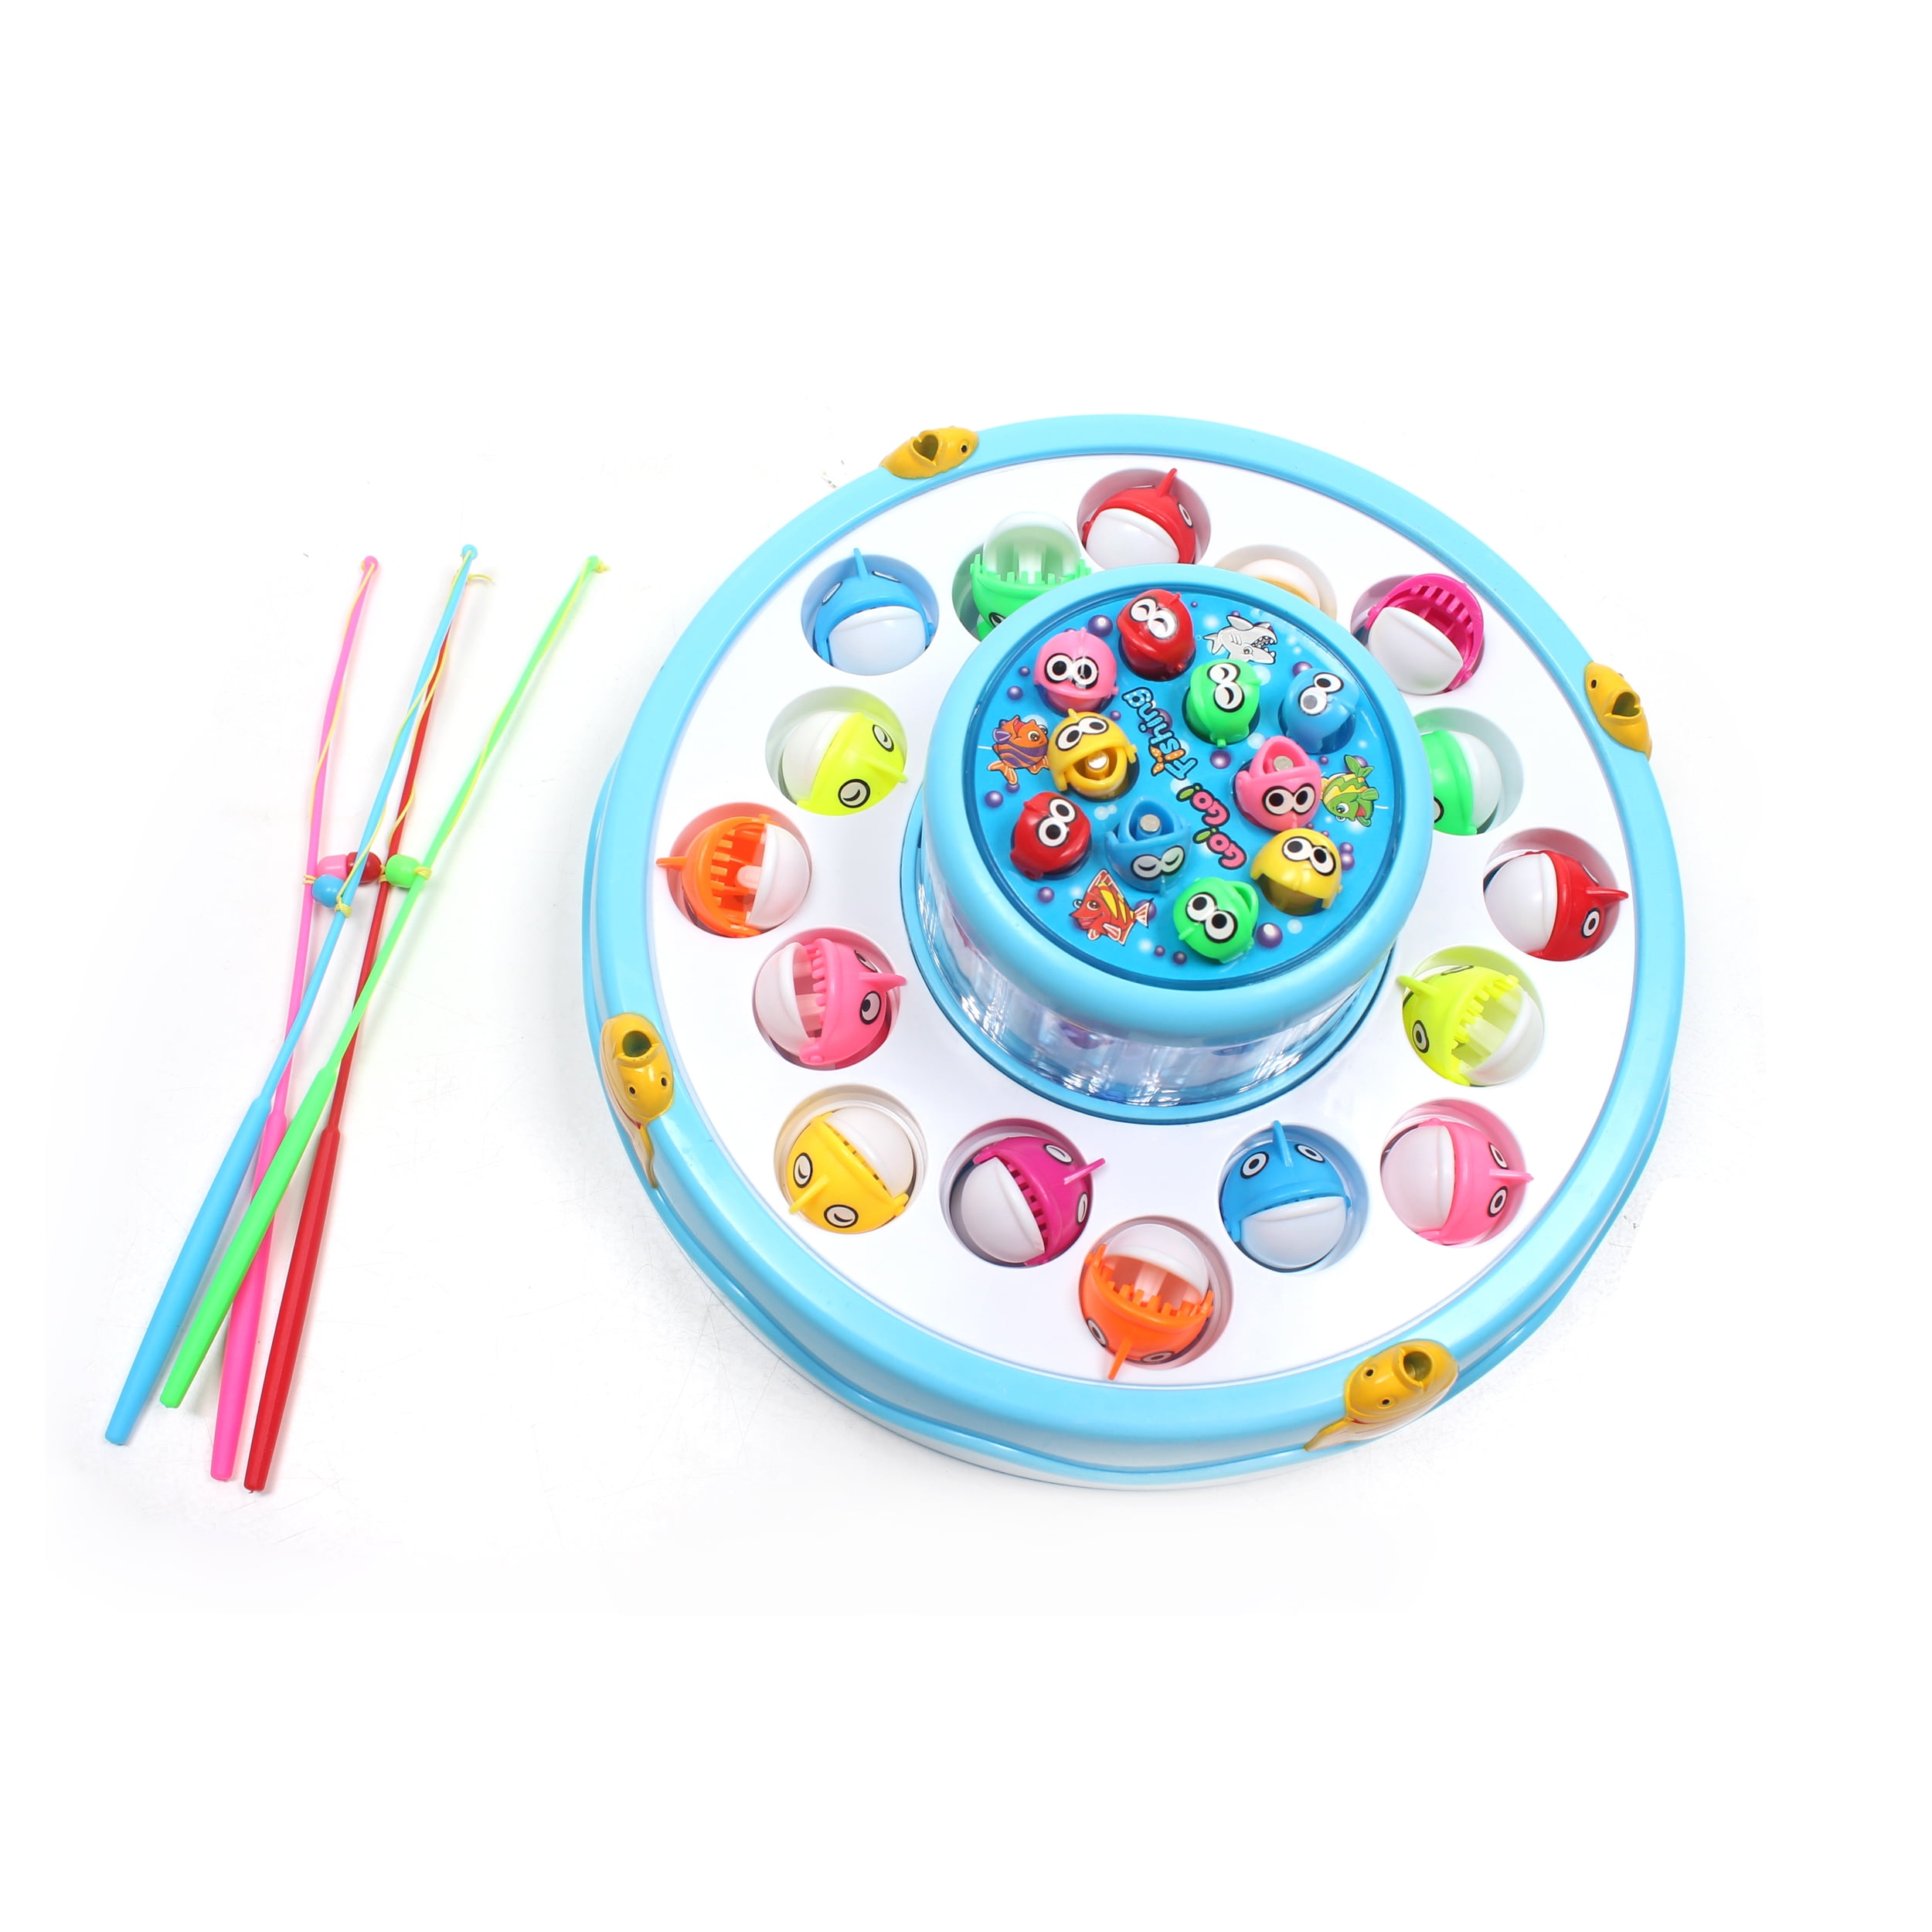 Playworld Let's Go Fishing! 2 Spinning Fishing Pond with Sounds 26 Fish - Blue